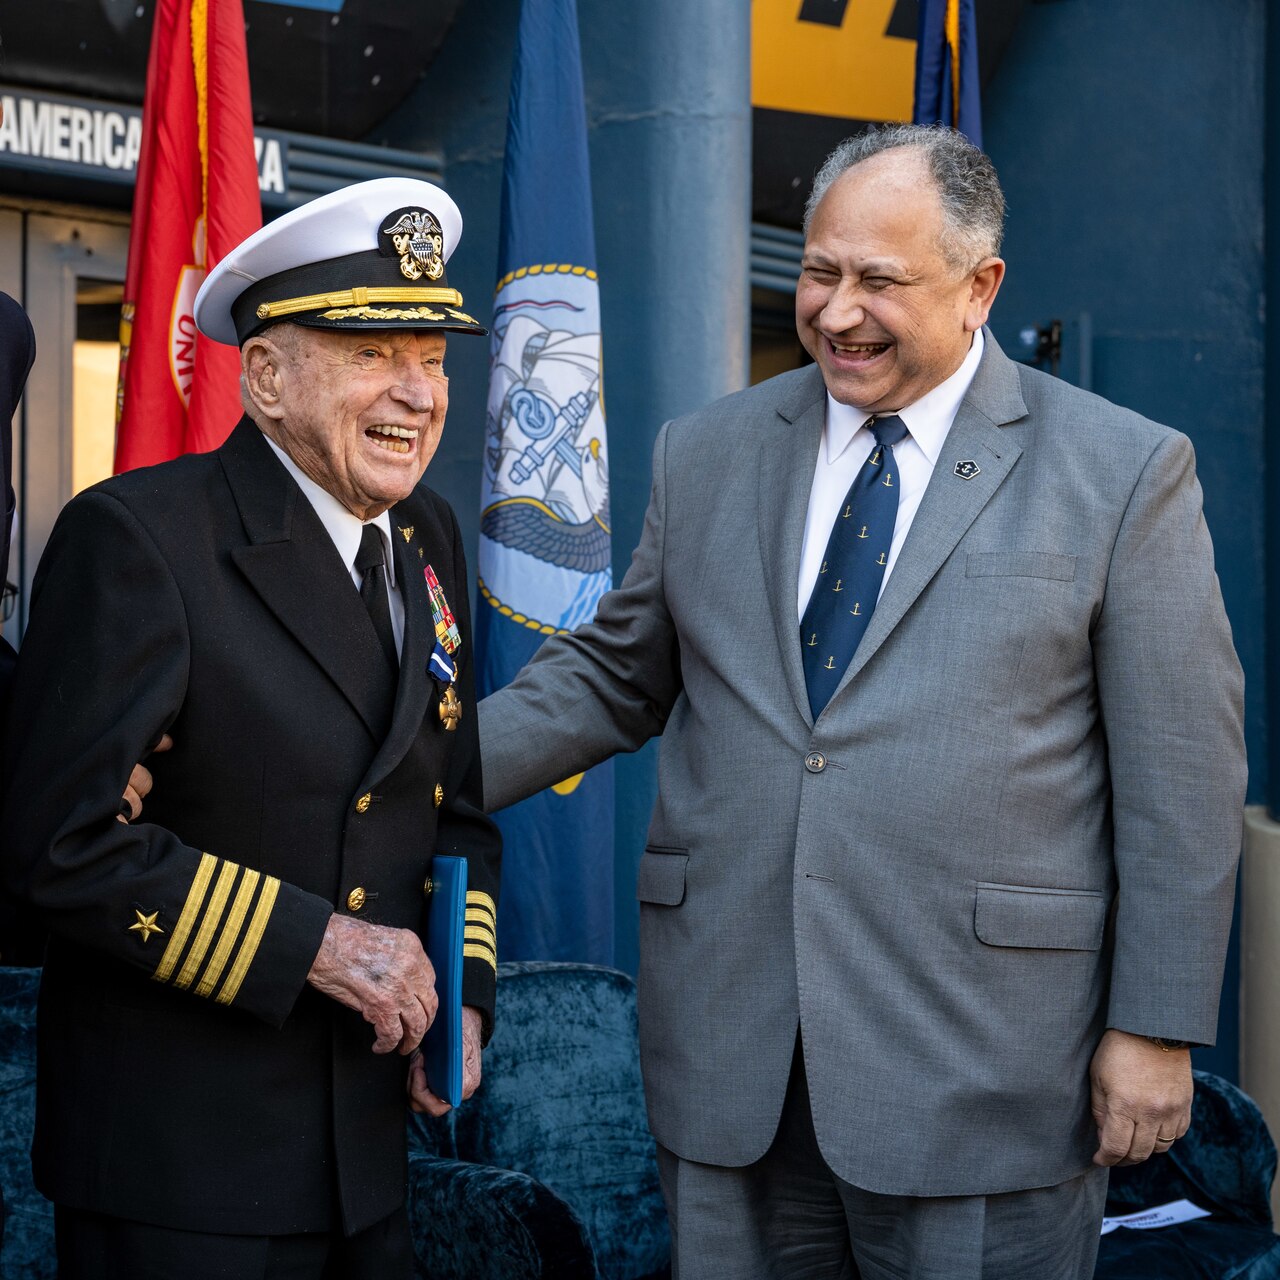 SAN DIEGO (Jan. 20, 2023) — Secretary of the Navy Carlos Del Toro visits with retired U.S. Navy Capt. E. Royce Williams following a ceremony awarding Williams with a Navy Cross Jan. 20. Del Toro was in San Diego for various fleet engagements, awards ceremonies and ship events.